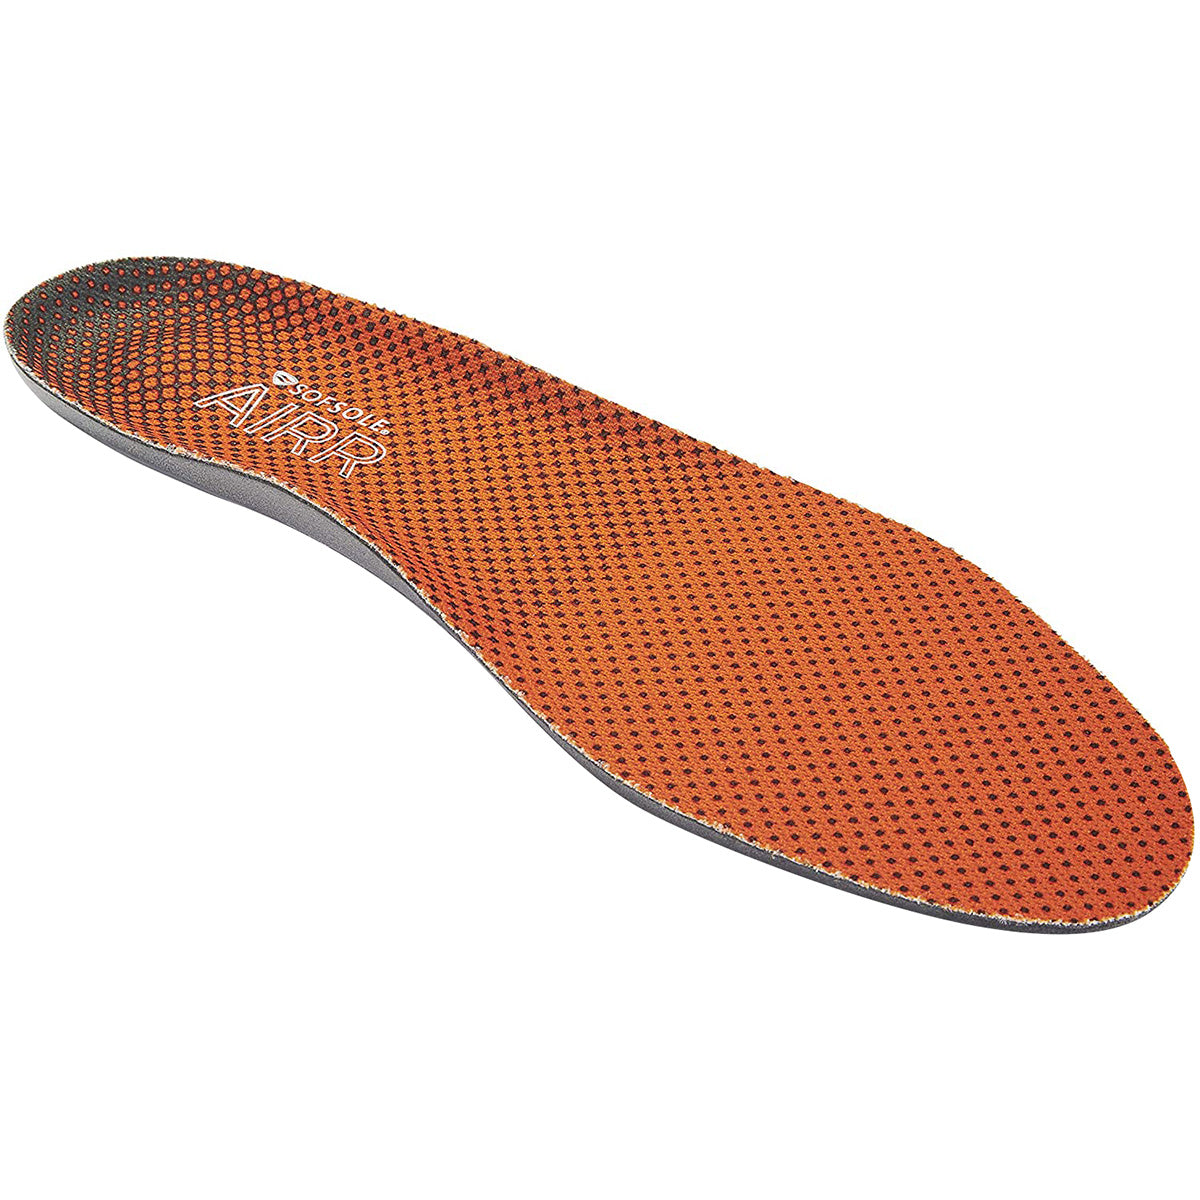 Sof Sole Airr Performance Cushion Full Length Shoe Insoles SofSole